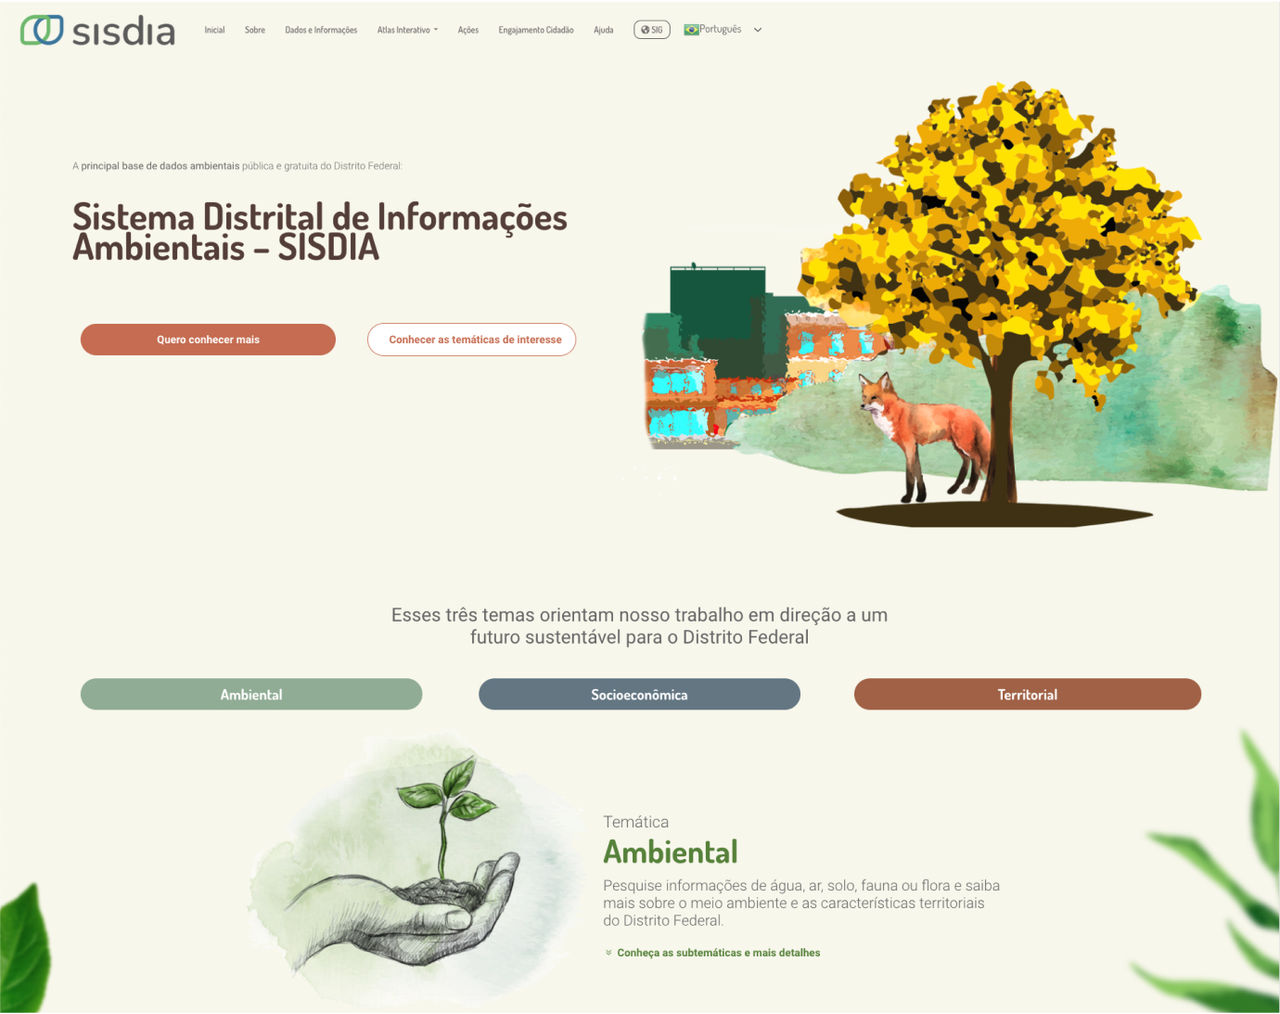 SISDIA homepage graphic displaying the three data themes users can explore environmental, socioeconomic, and territorial